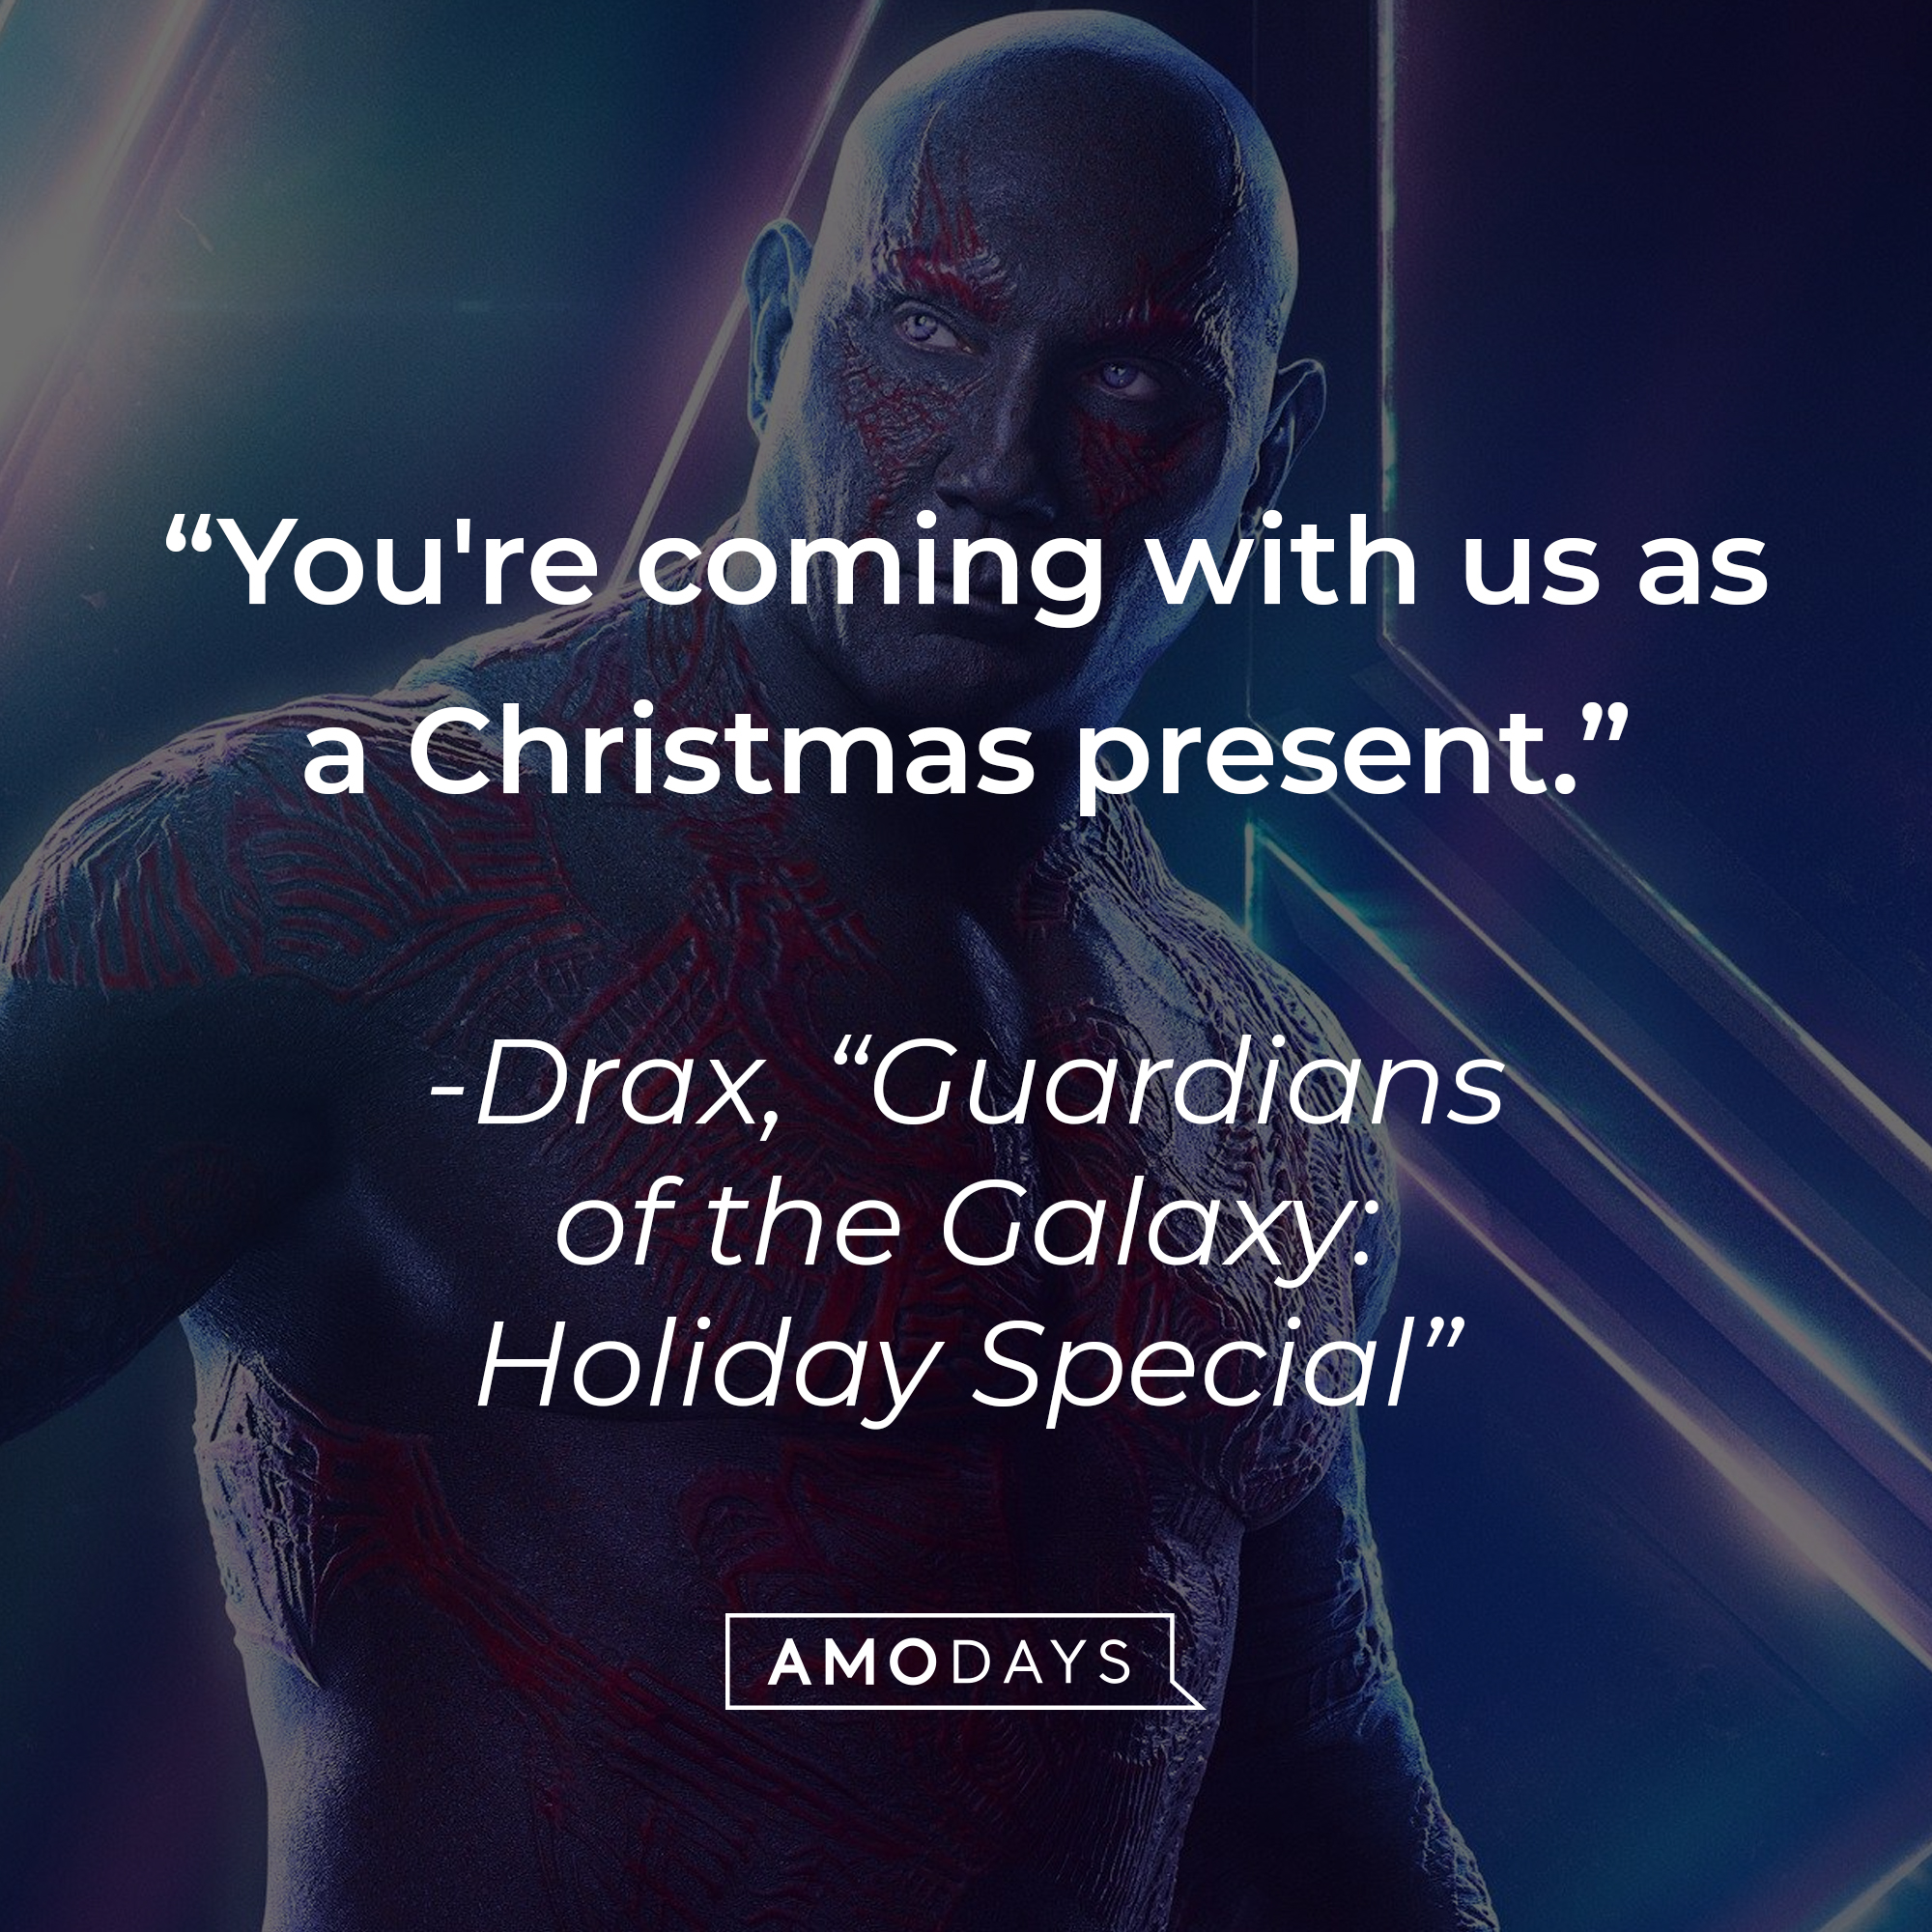 Drax with his quote: "You're coming with us as a Christmas present." | Source: Facebook.com/guardiansofthegalaxy